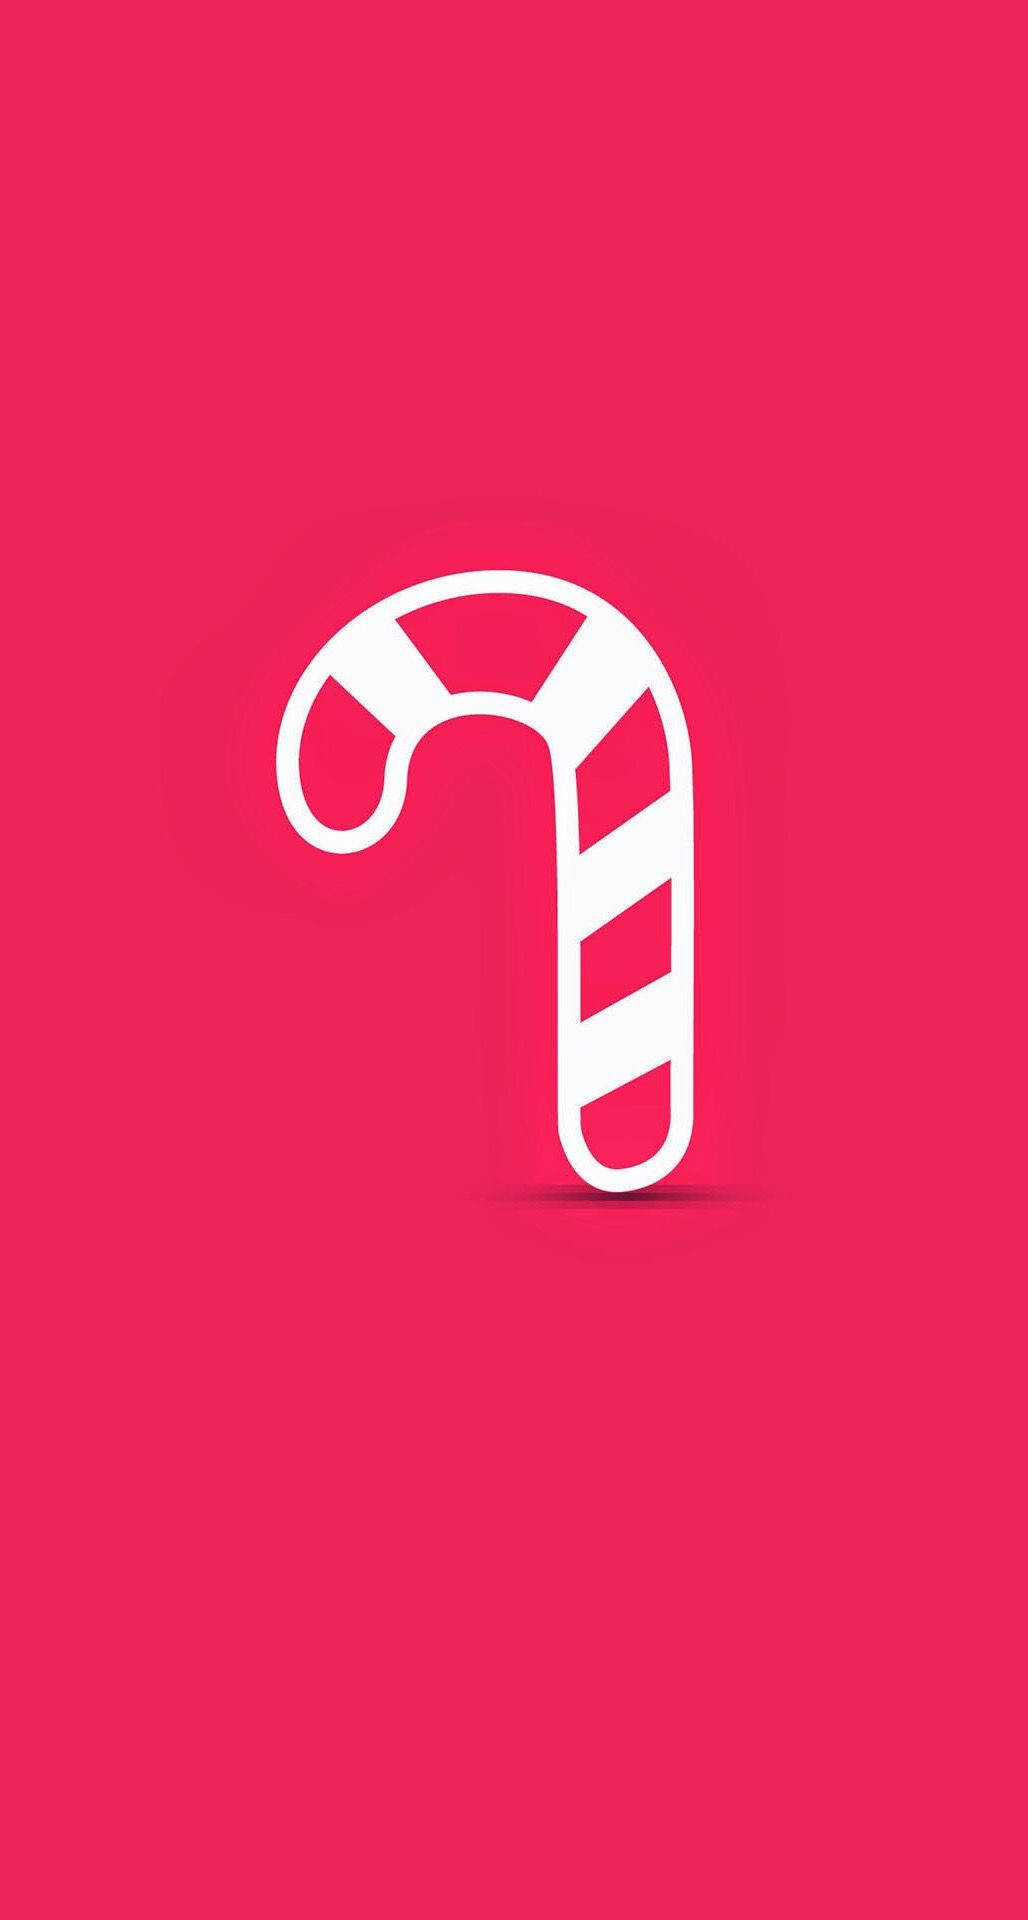 Tiny Candy Cane In Fuchsia Pink Wallpaper